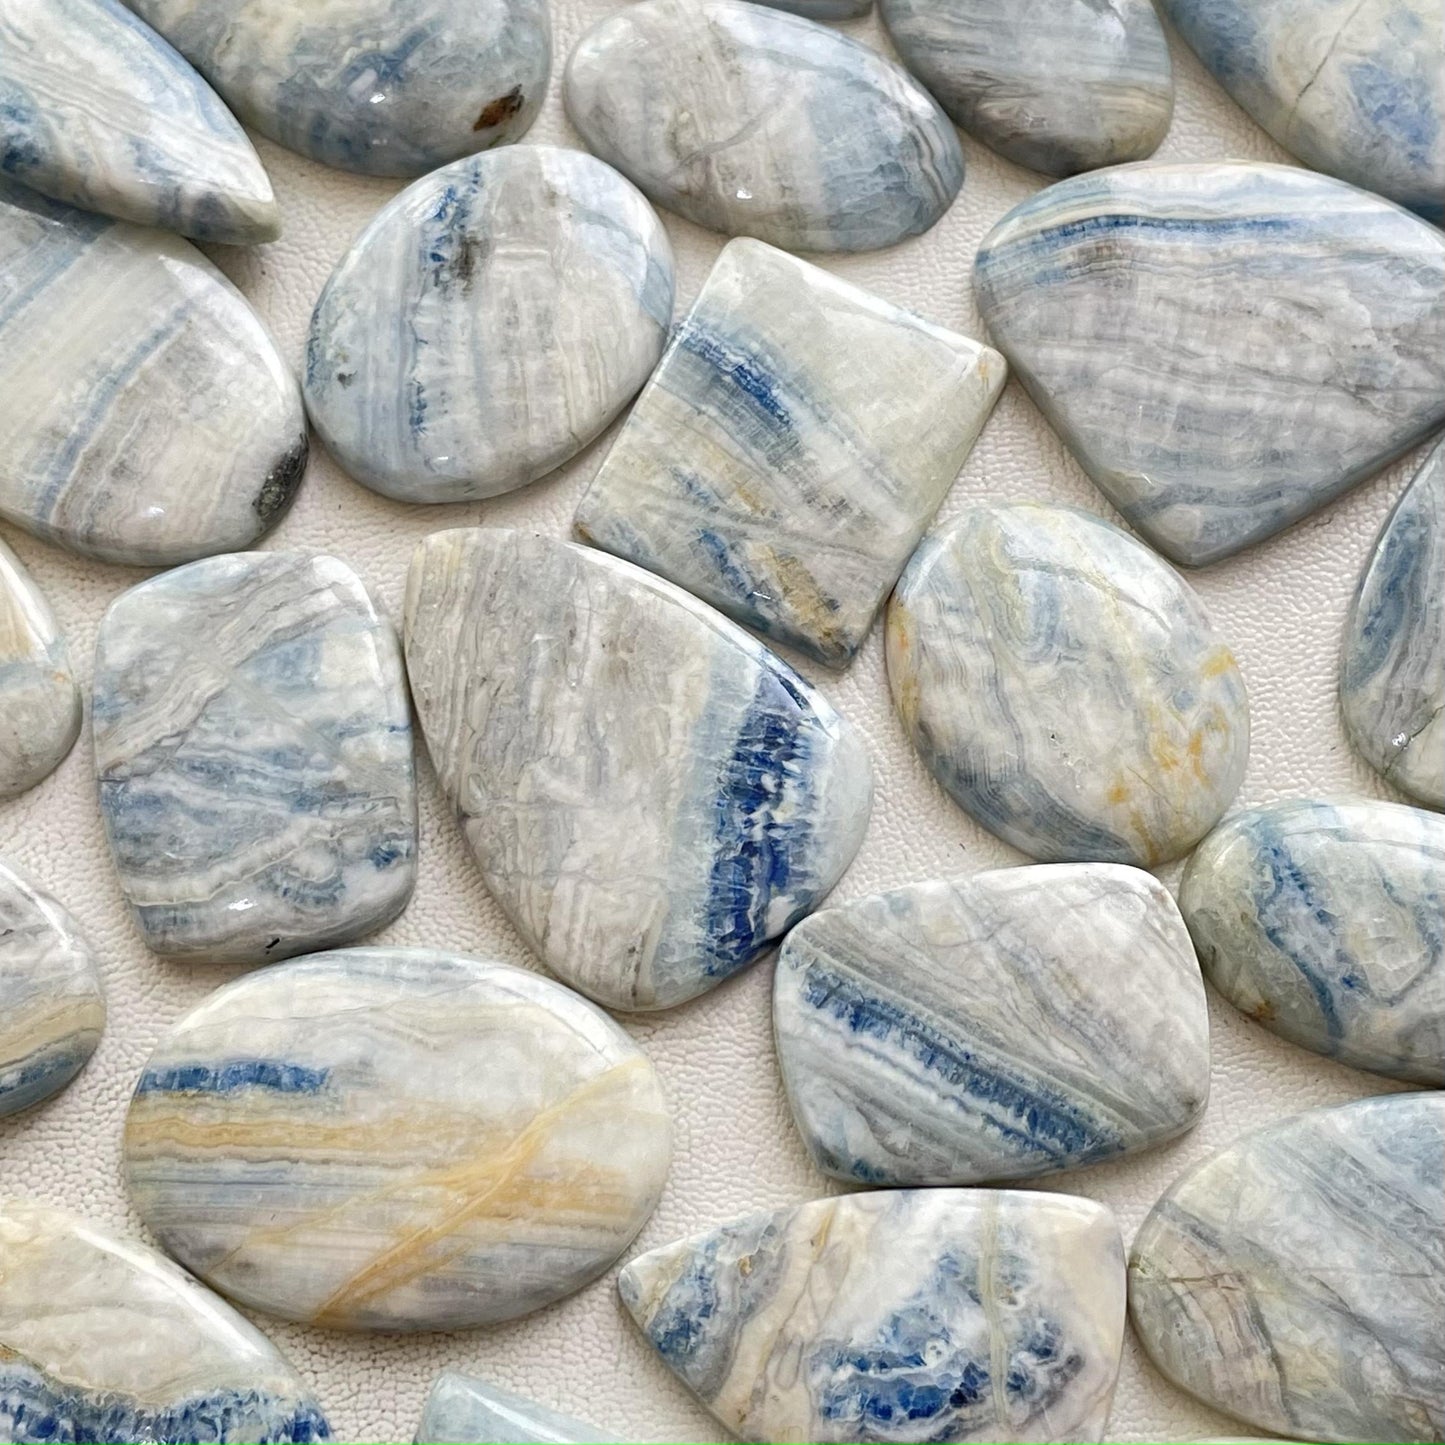 Natural Blue Rhodochrosite Cabochon Wholesale Lot By Weight With Different Shapes And Sizes Used For Jewelry Making (Natural)